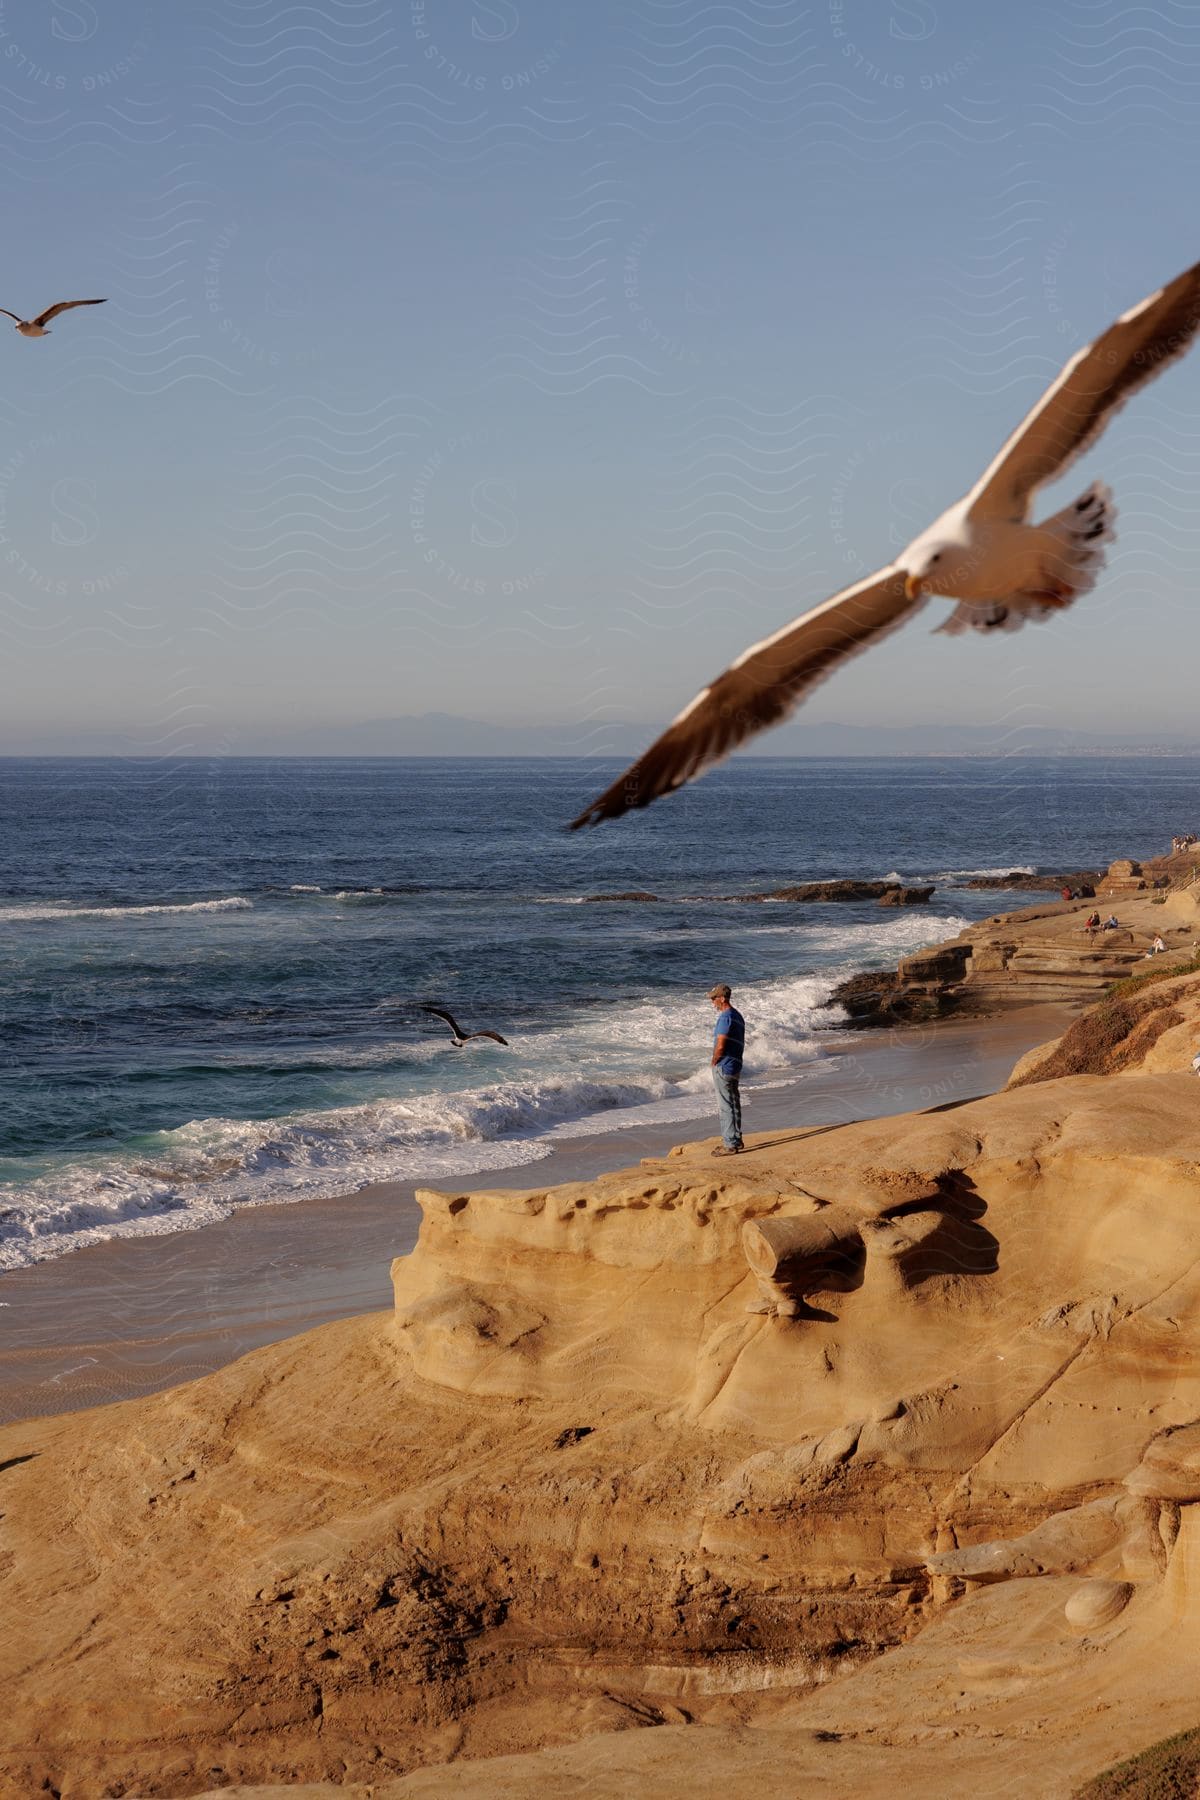 A person stands on the edge of a small sand hill in front of the beach watching the ocean while seagulls fly around.